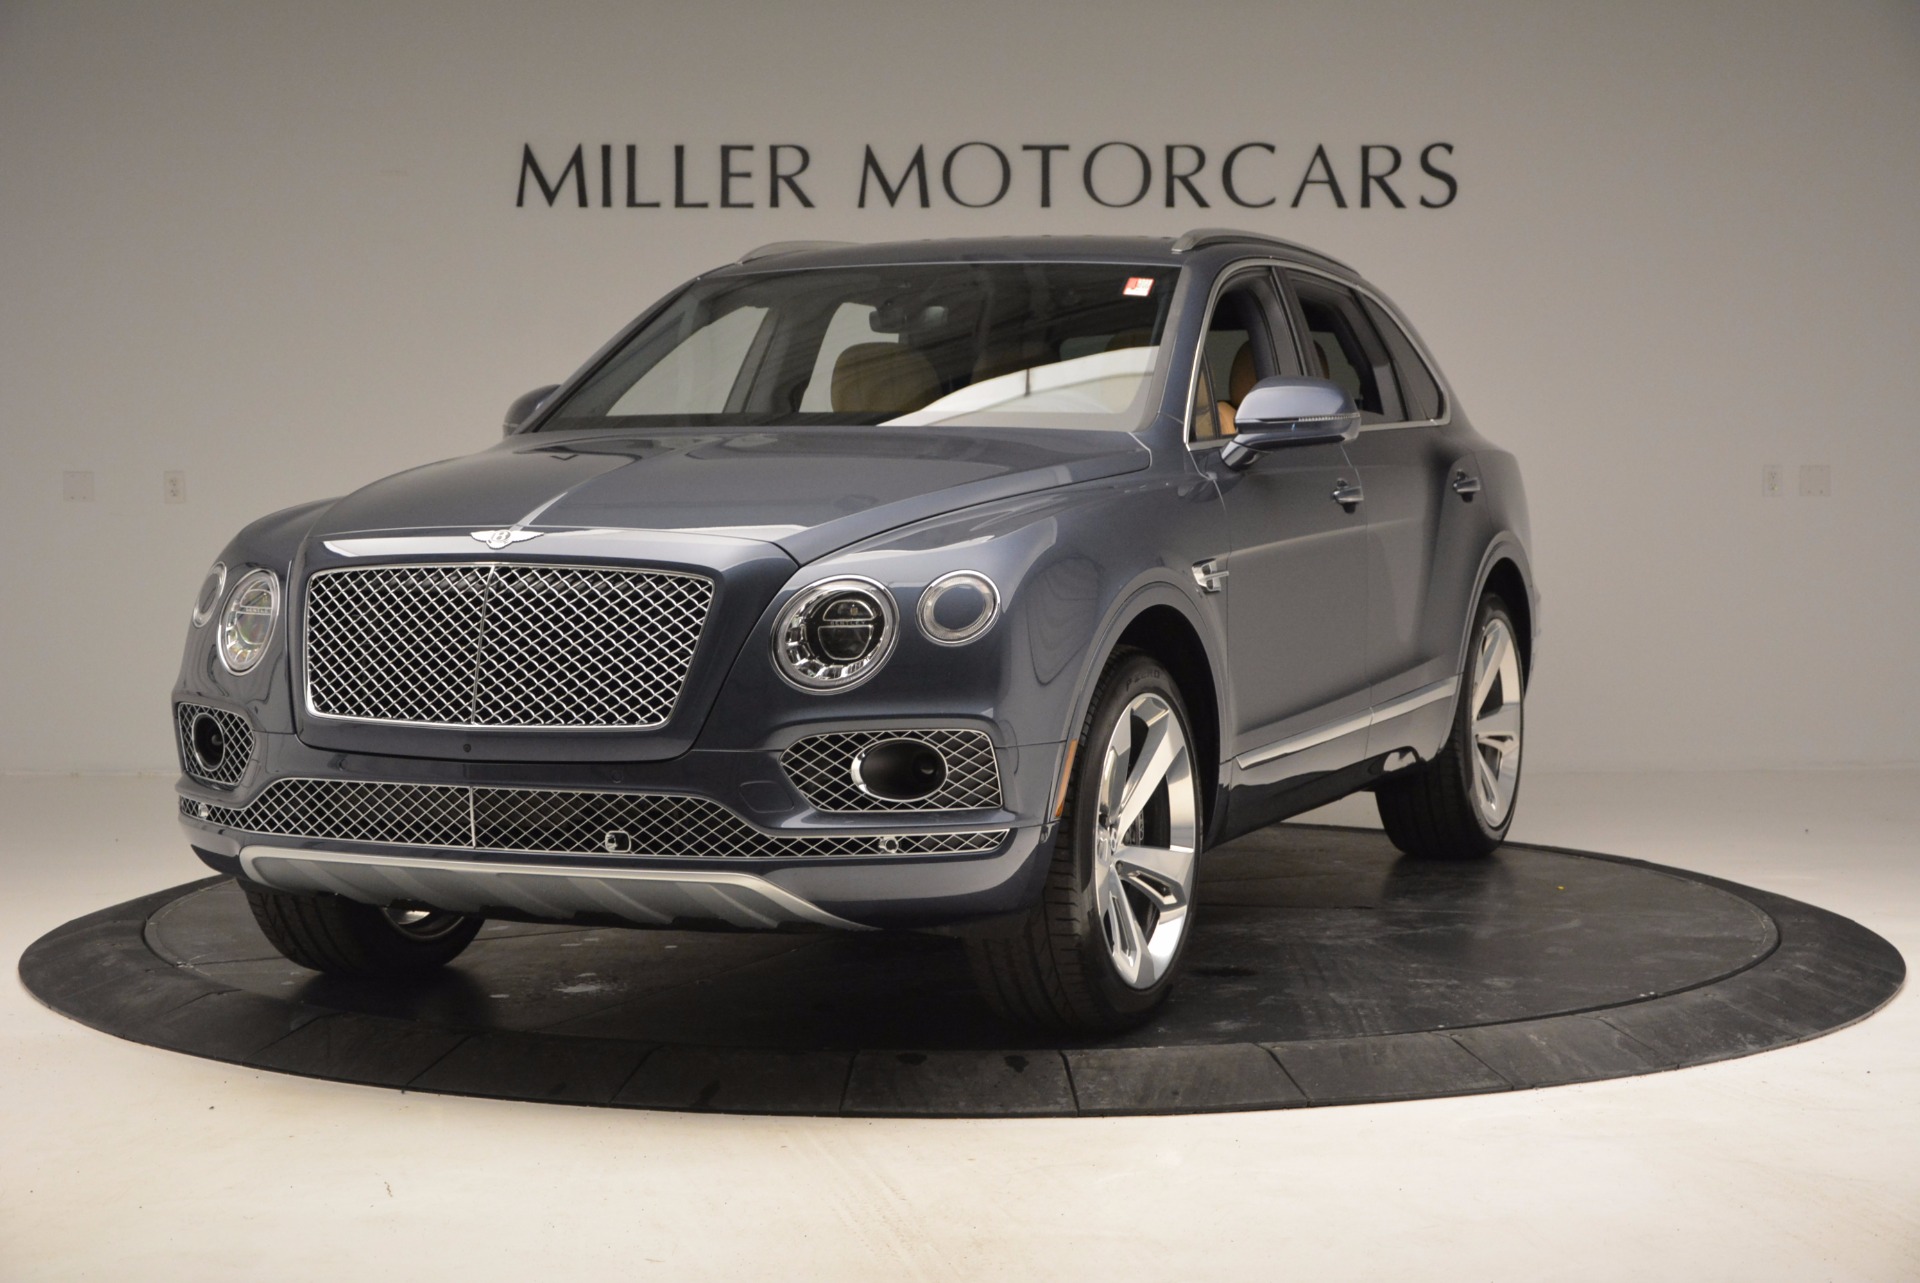 New 2017 Bentley Bentayga for sale Sold at Rolls-Royce Motor Cars Greenwich in Greenwich CT 06830 1